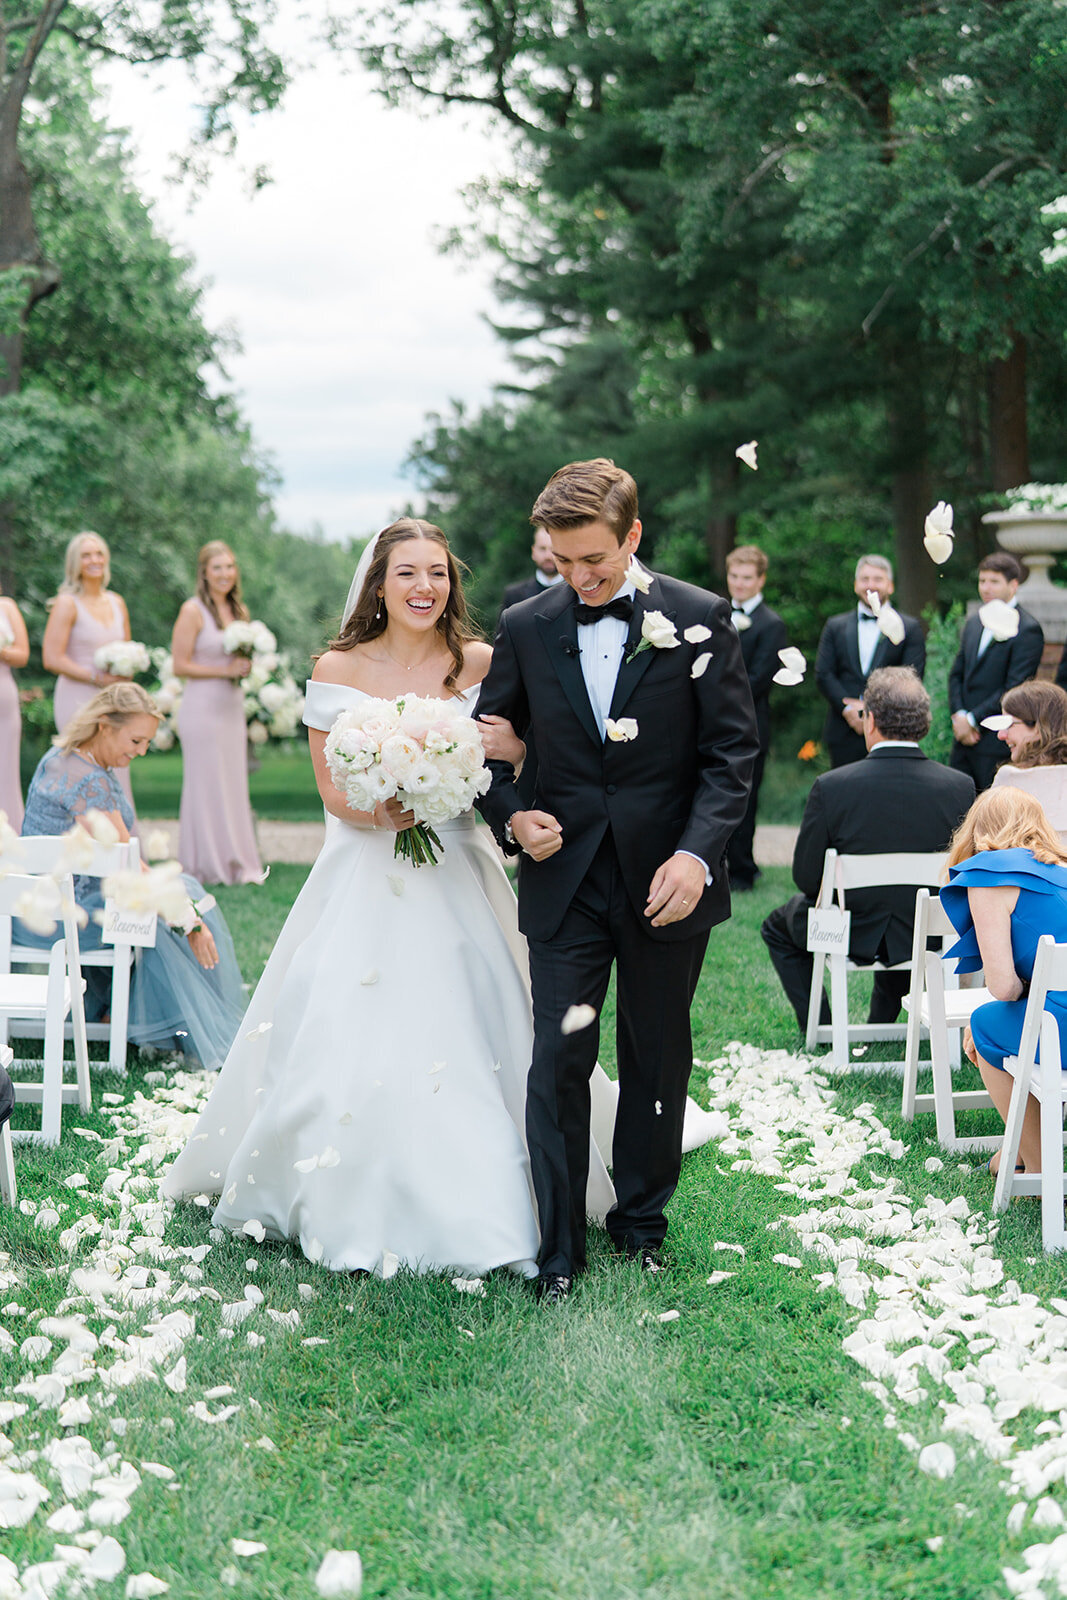 Bride and groom laugh and walk down the aisle after perfect outdoor wedding ceremony at the Bradley Estate. Boston area wedding venue. Destination wedding photographer. Kailee DiMeglio Photography.